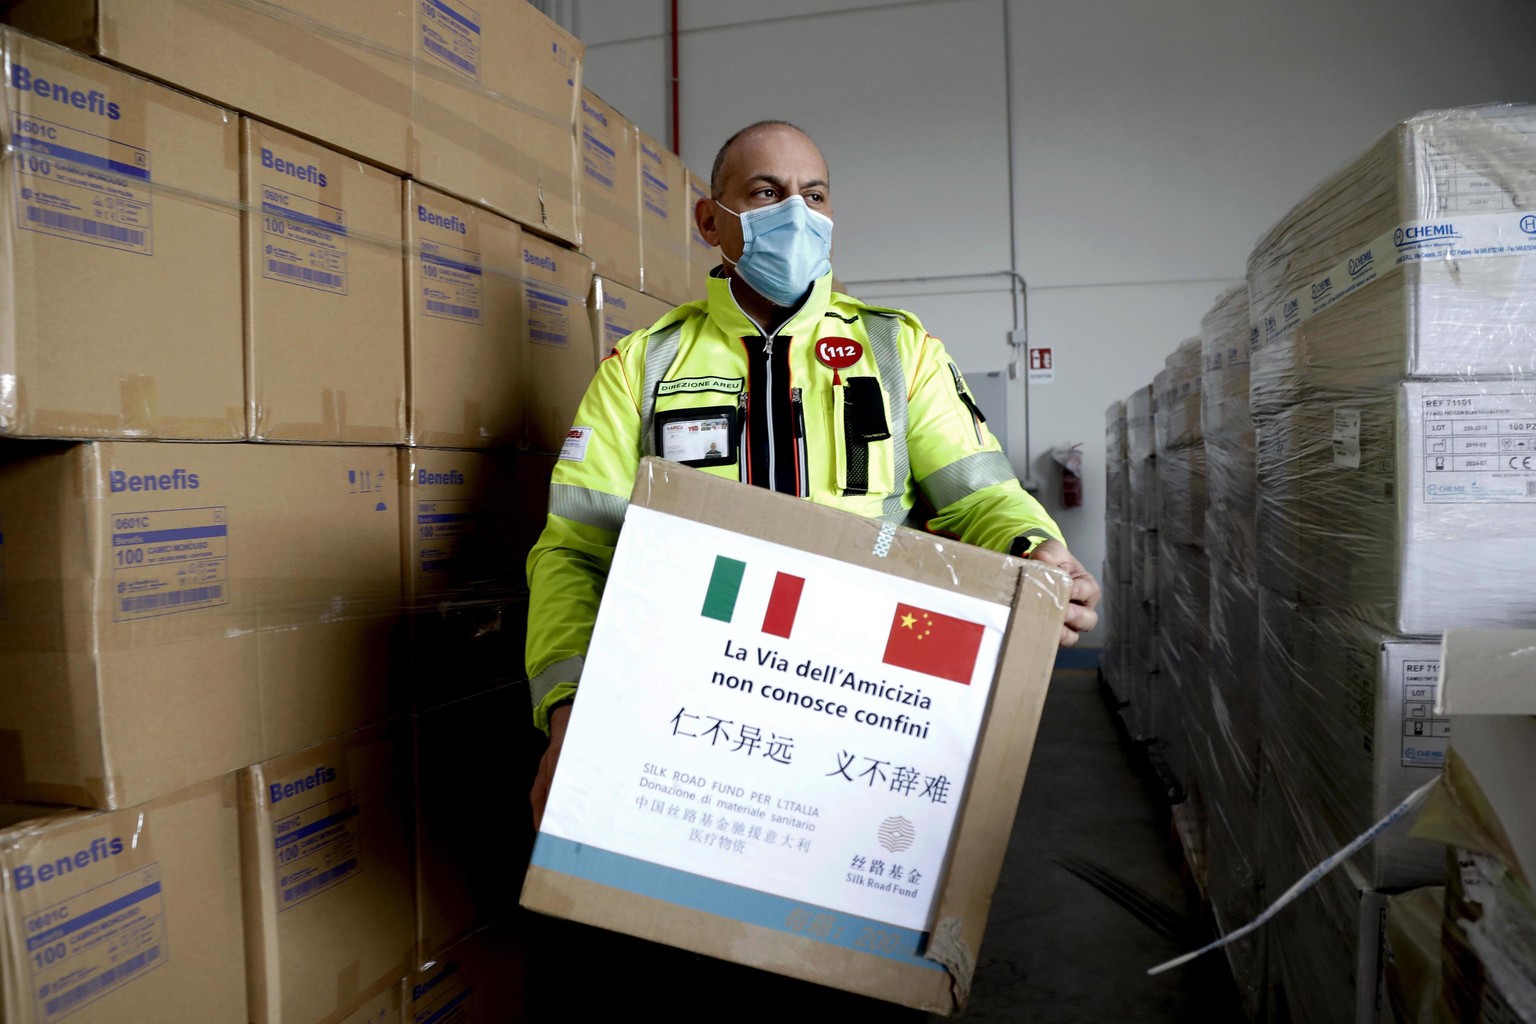 epa08309422 A staff of the Regional Emergency Emergency Company AREU carries a box with supplies donated by China, containing medical equipment and personal protection devices for the whole of Lombard ...